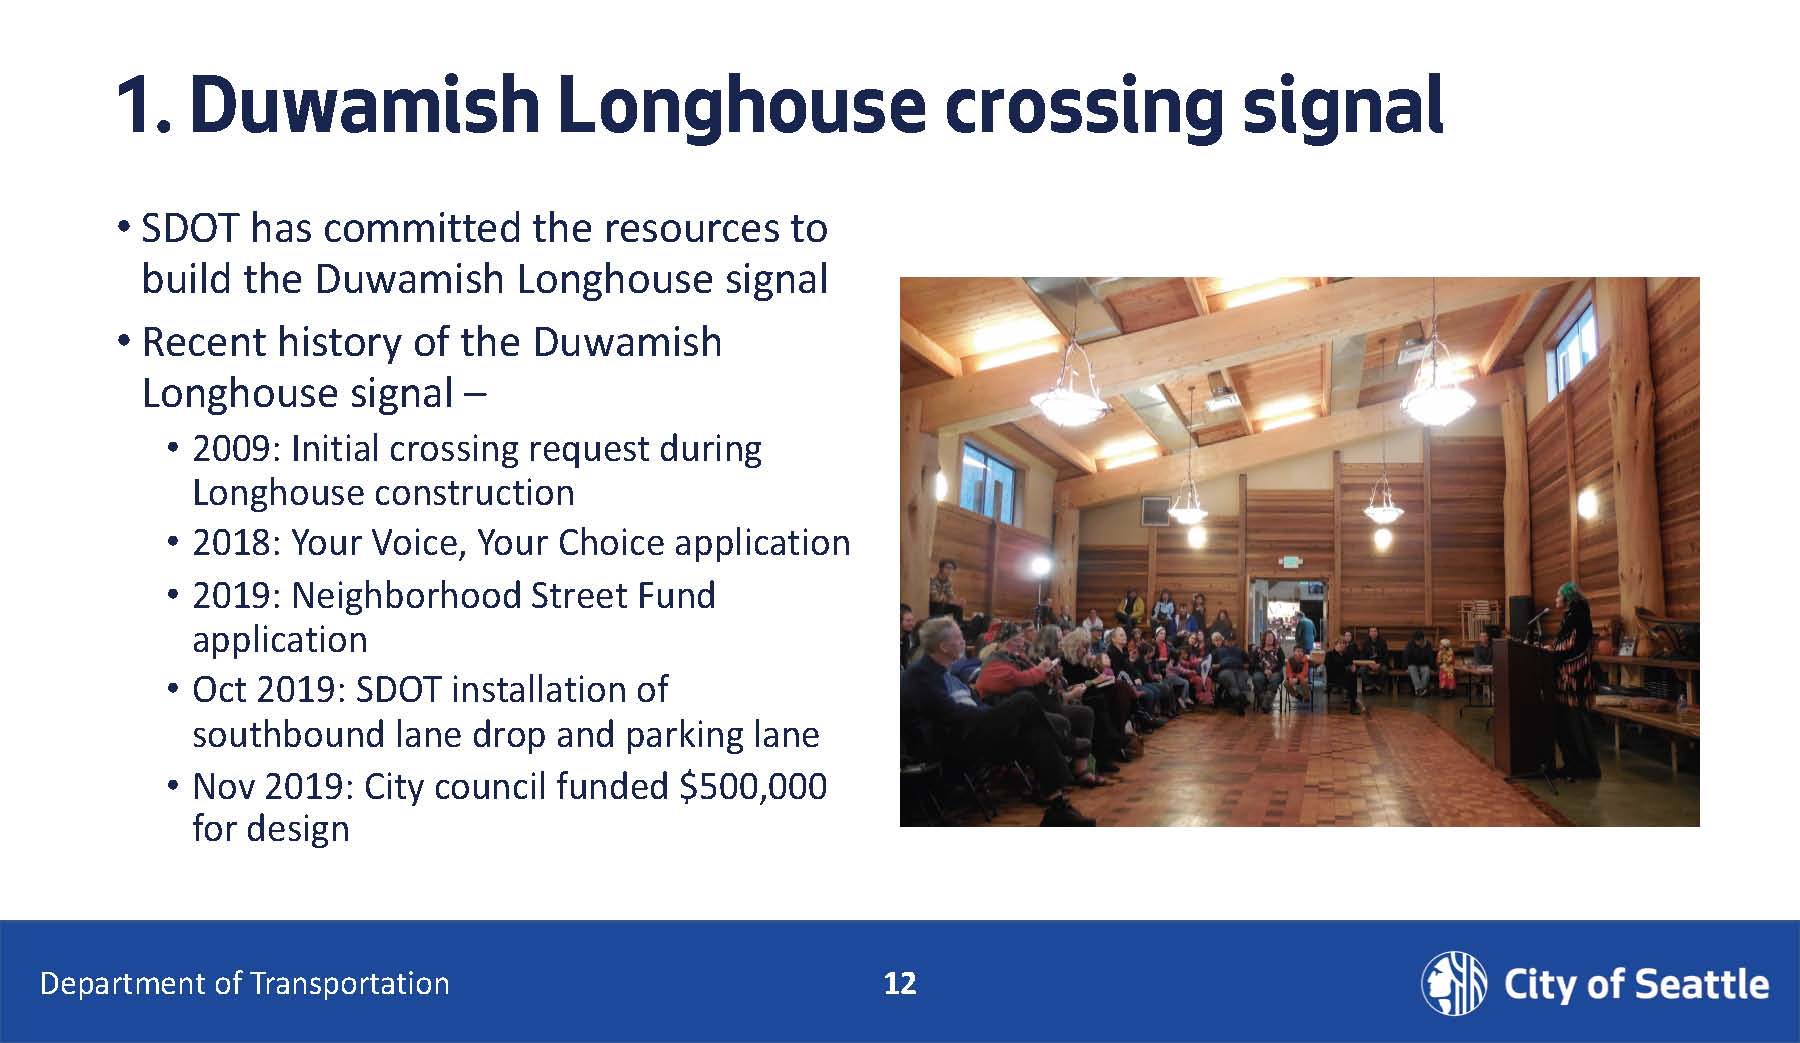 Duwamish Long House crossing